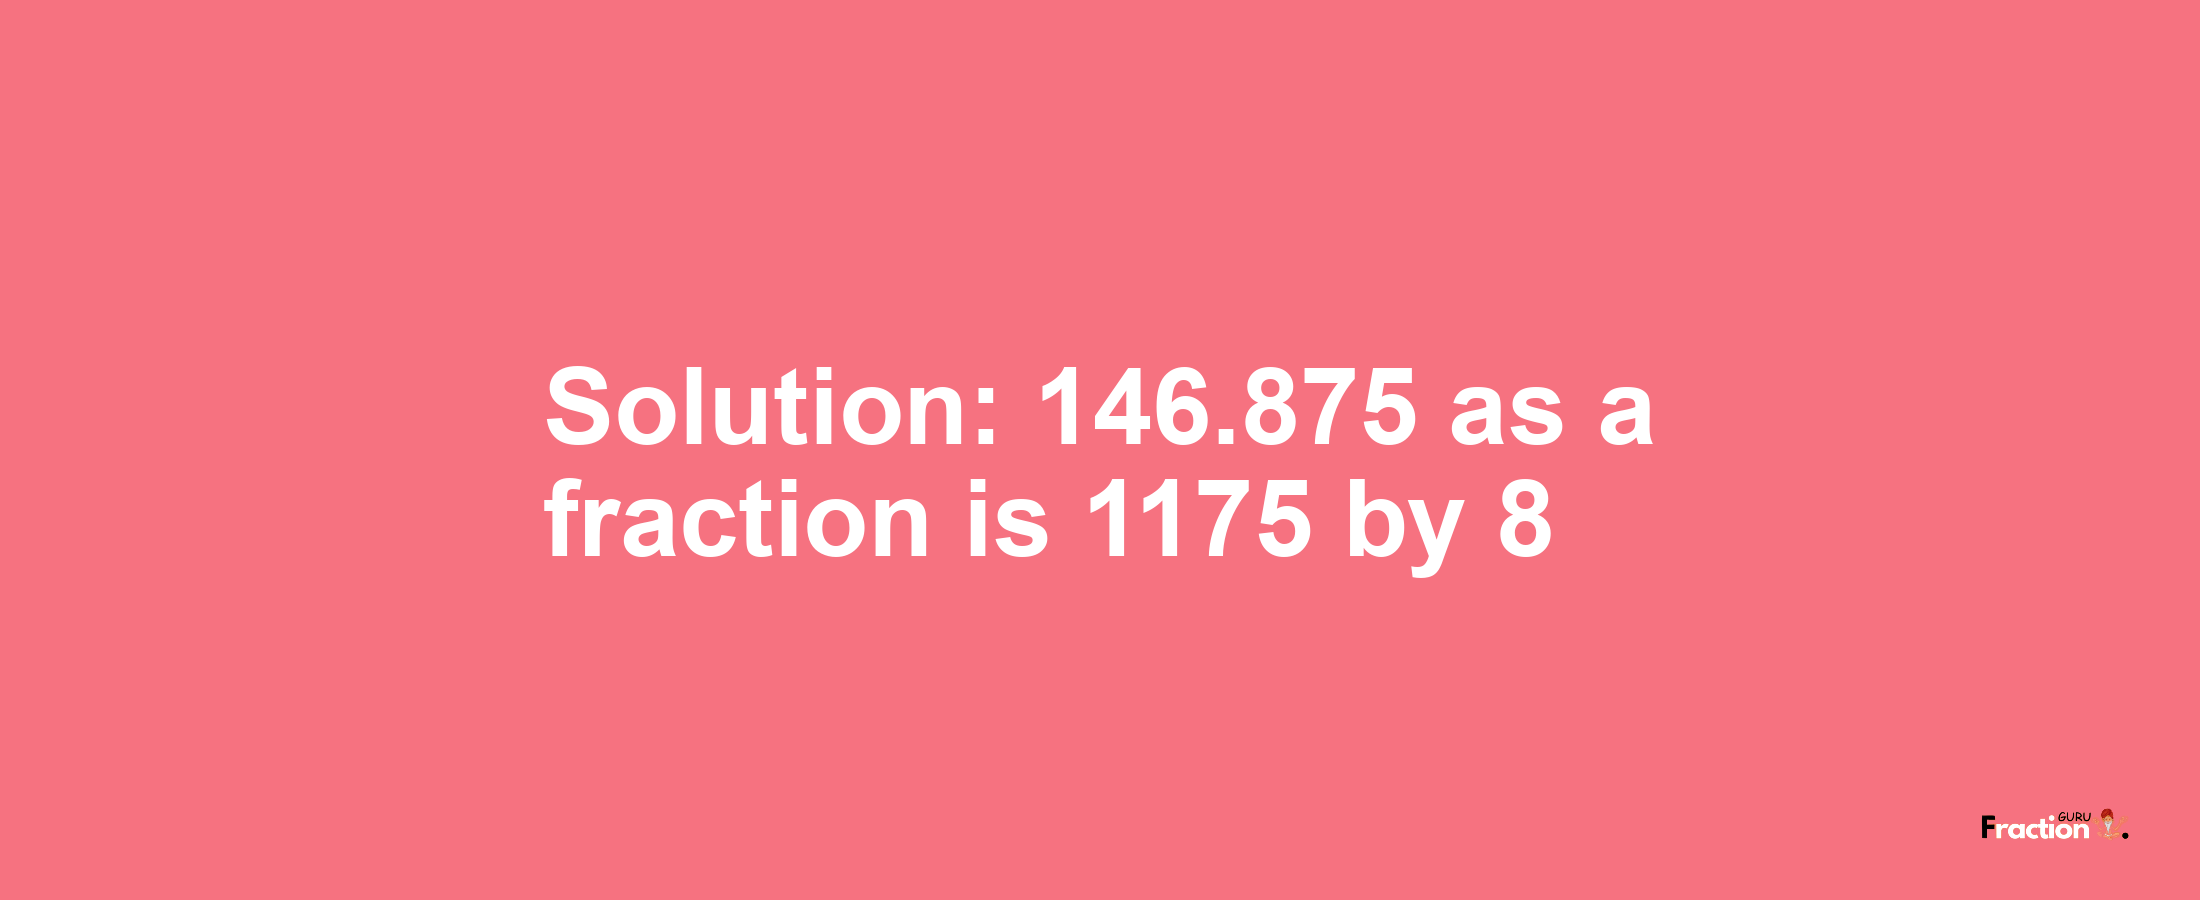 Solution:146.875 as a fraction is 1175/8